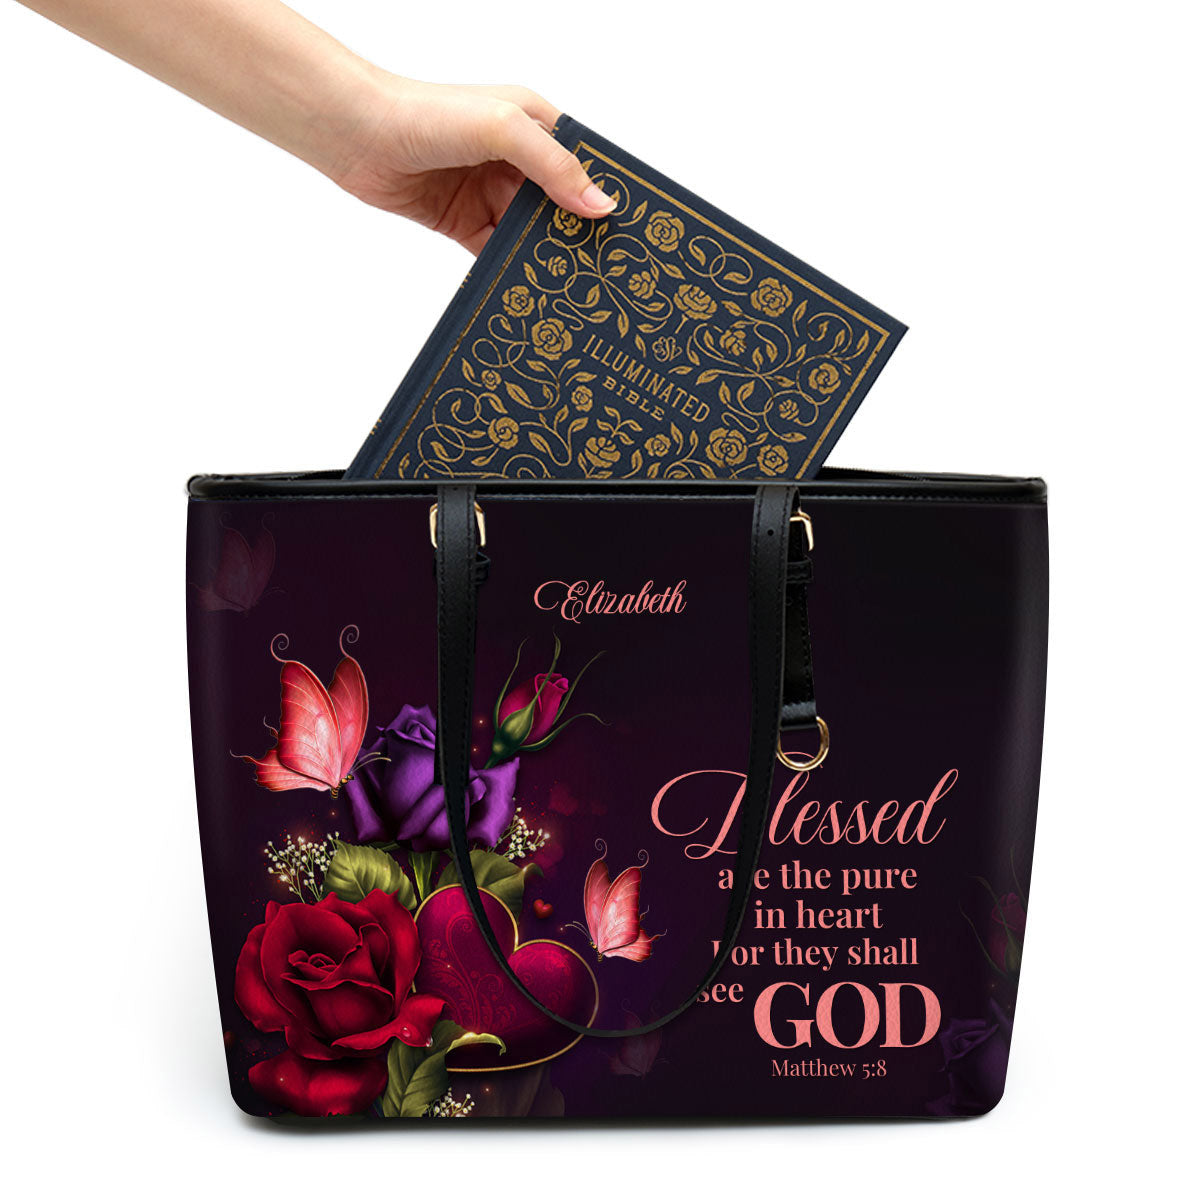 Blessed Are The Pure In Heart For They Shall See God Personalized Large Leather Tote Bag - Christian Gifts For Women